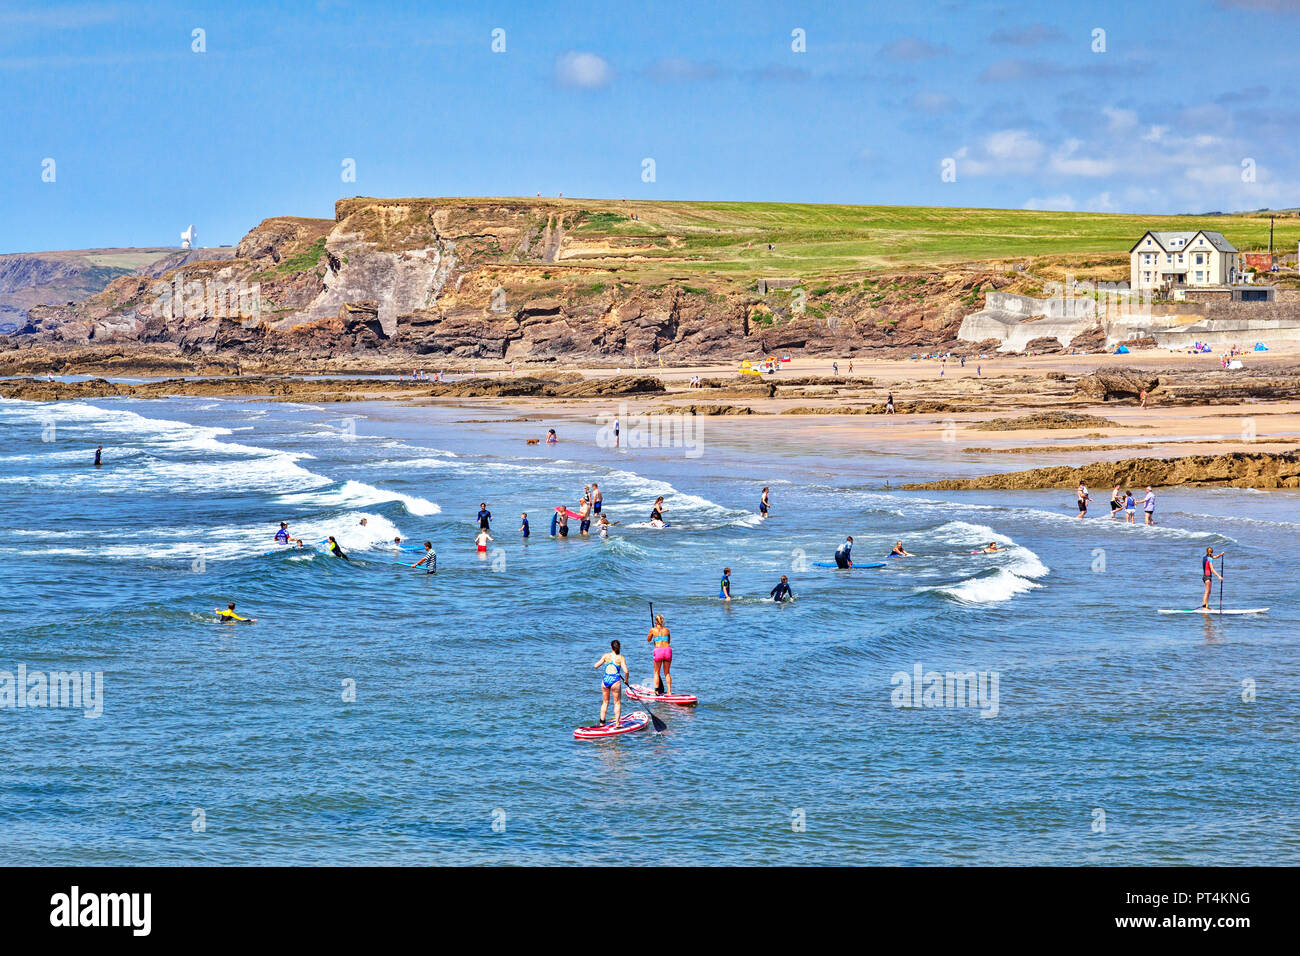 6 July 2018: Bude, Cornwall, UK - Crowds cooling off in the sea during the summer heatwave. Stock Photo